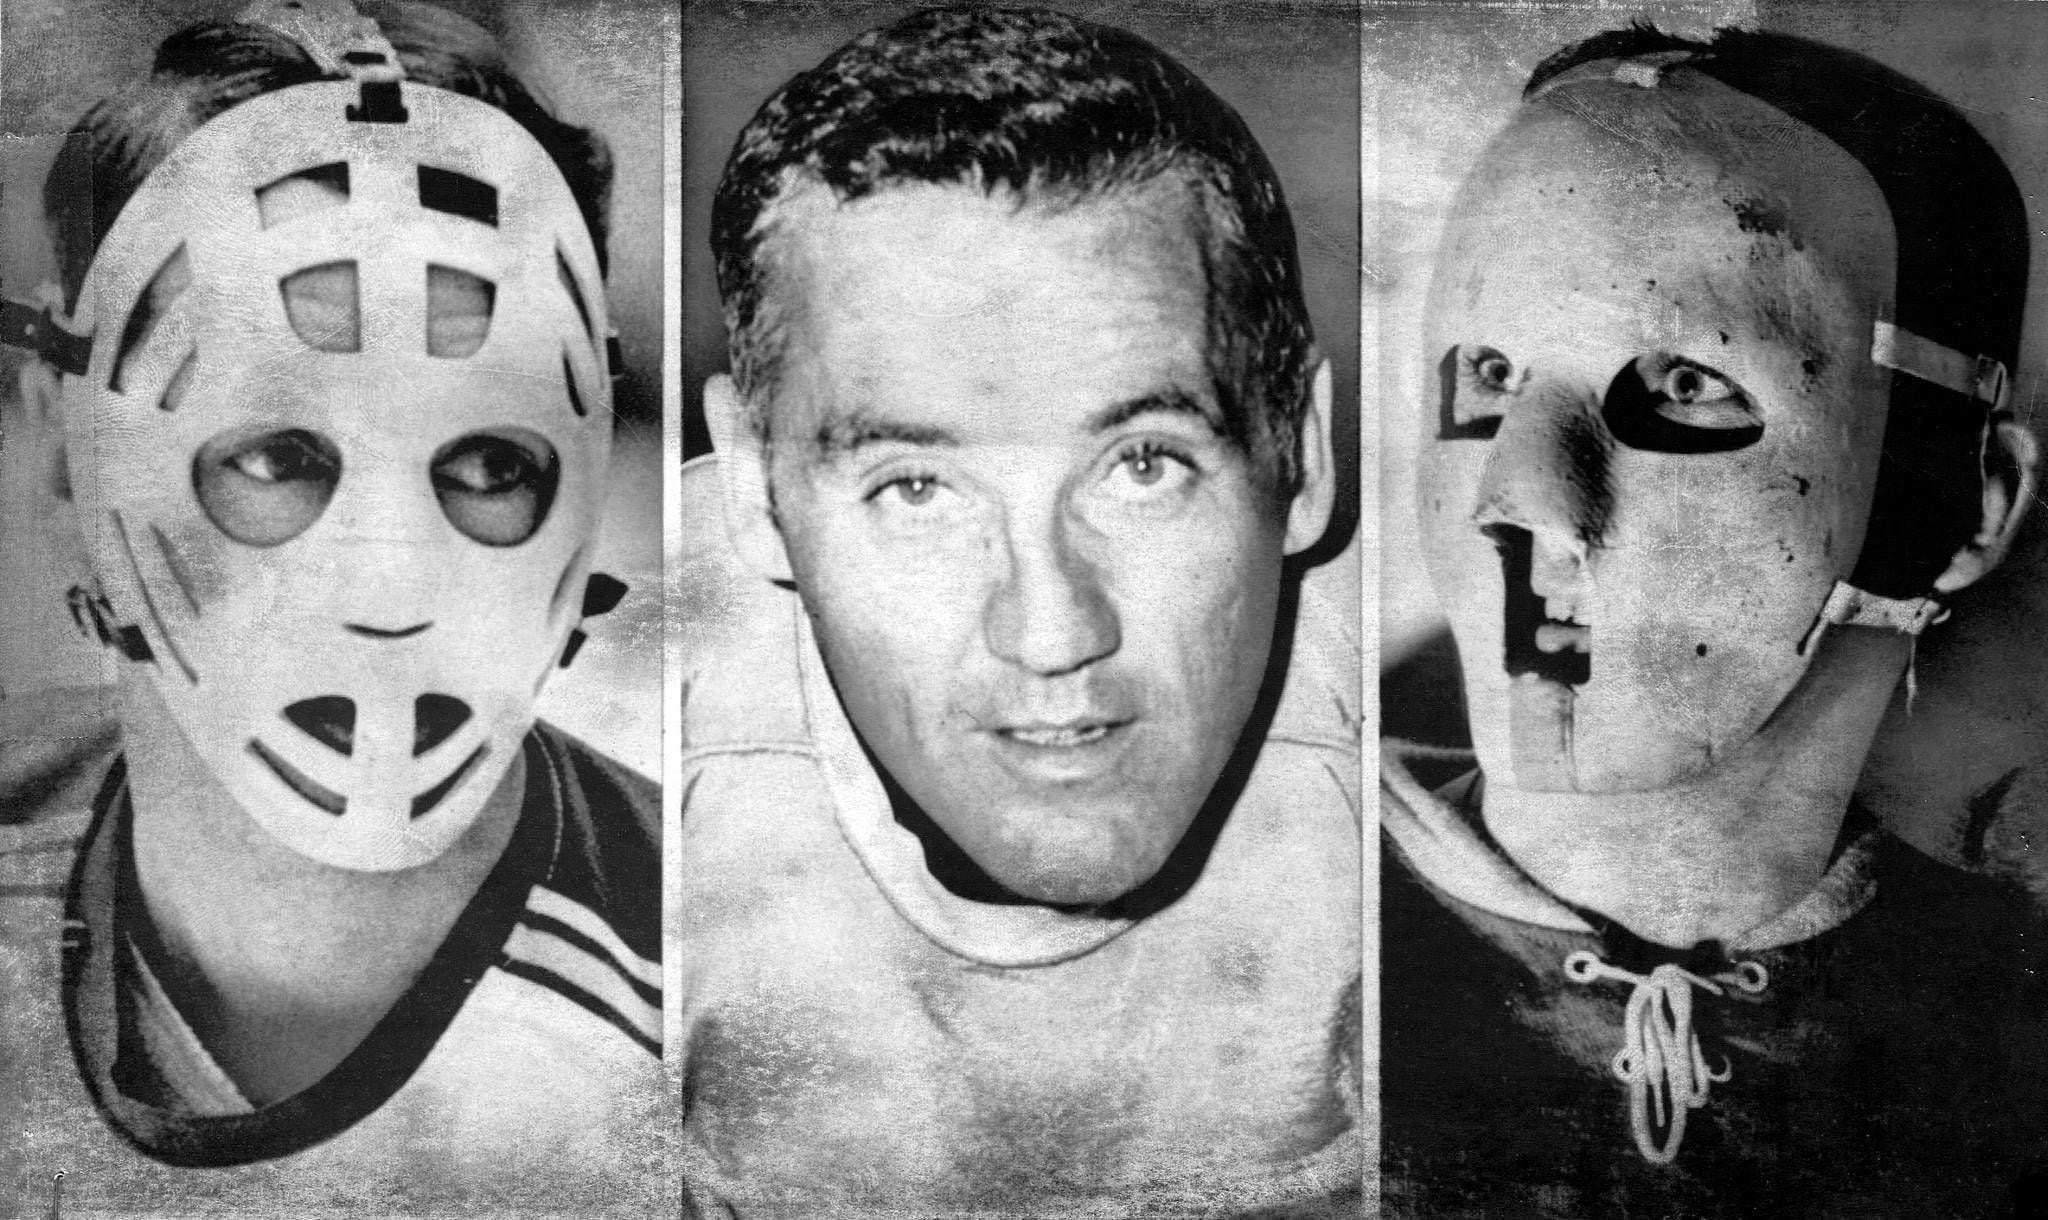 Game changer: How the goalie mask transformed the face of hockey - The  Globe and Mail